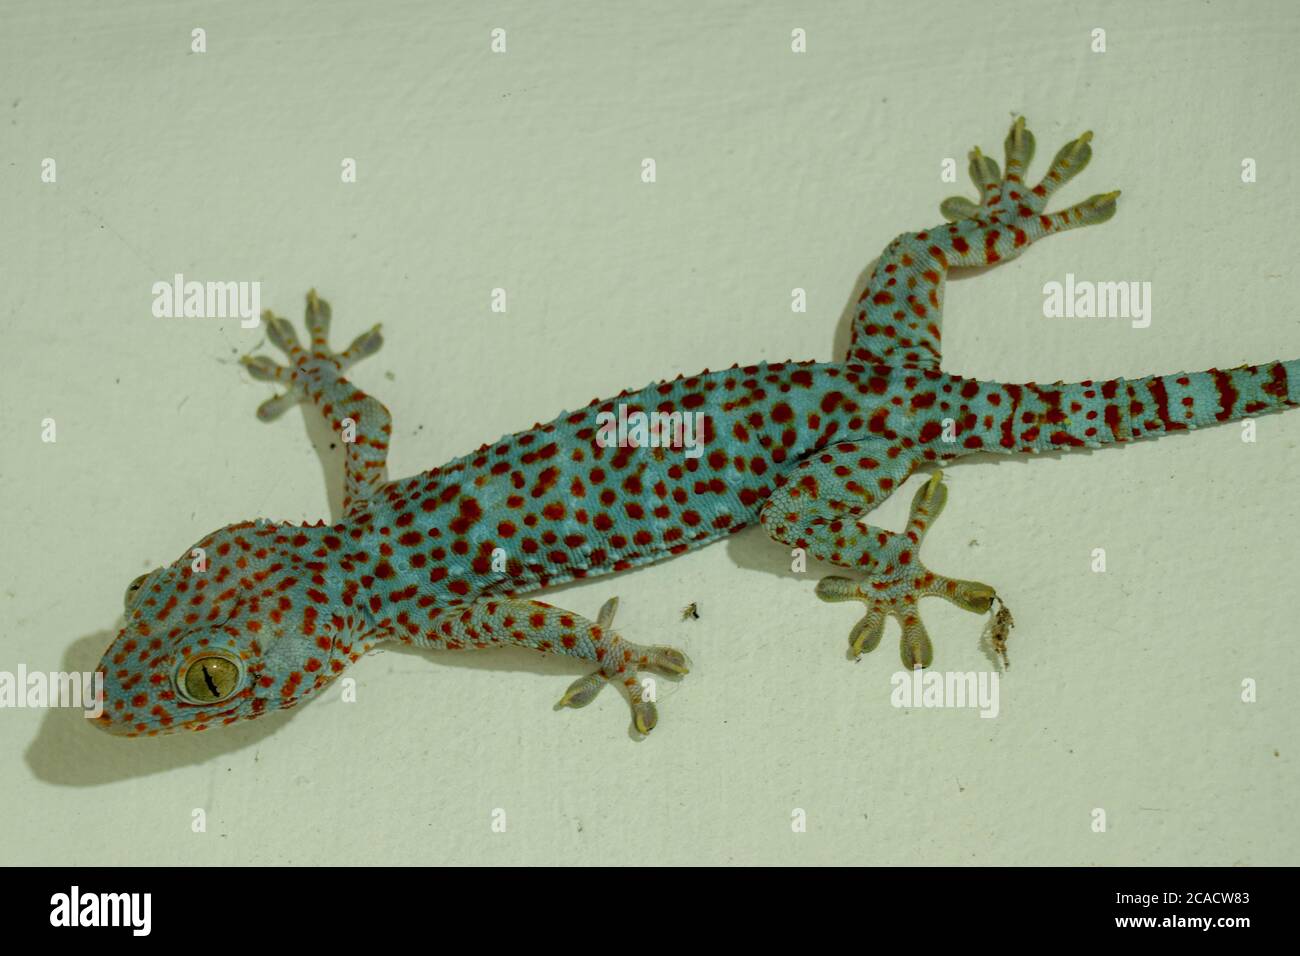 Soft selective focus tokay gecko, tucktoo on a concrete wall, grainy texture background. Large adult Gekko gecko with orange spots Stock Photo